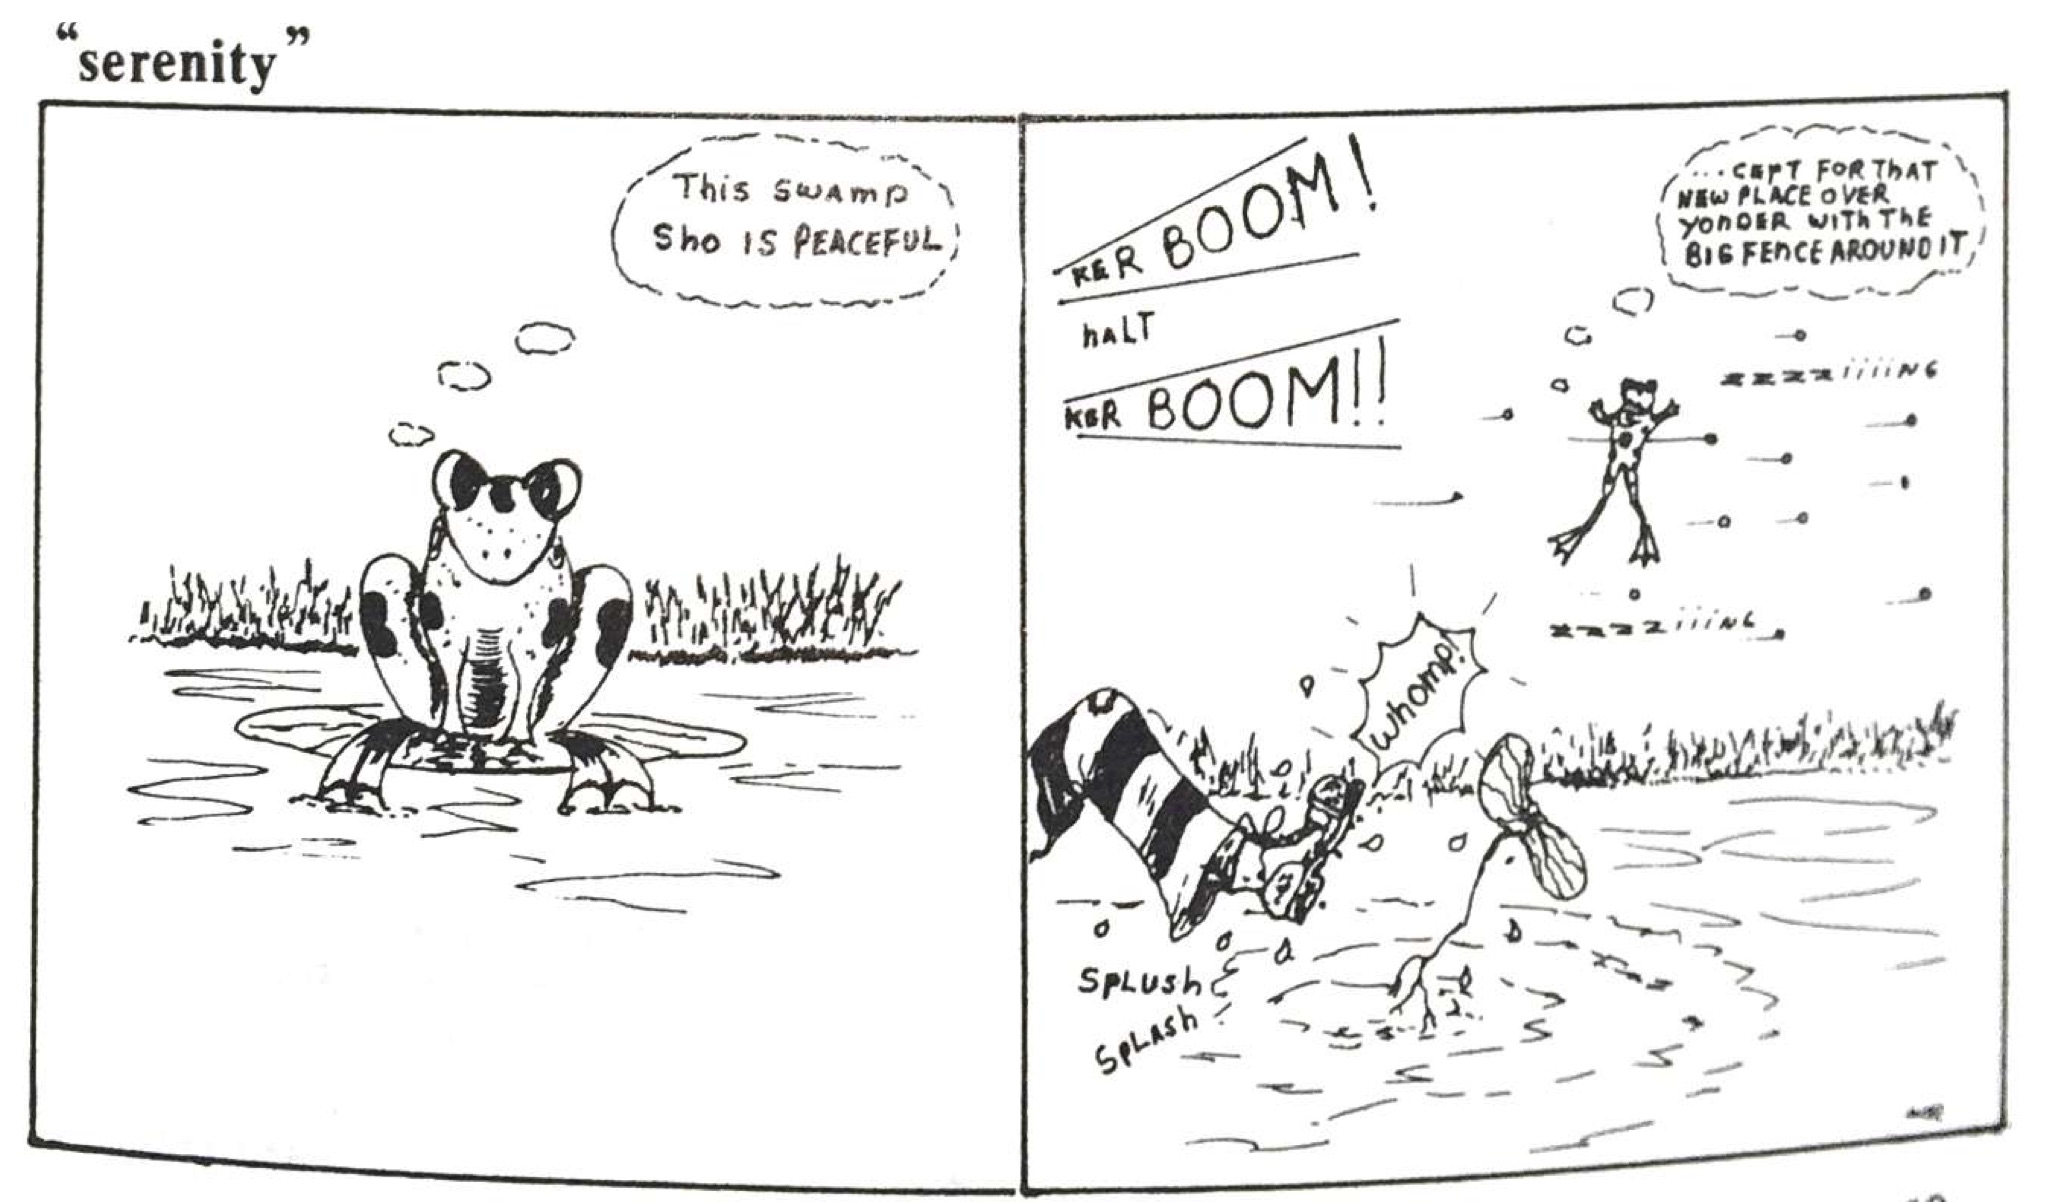 Slide 11: A line-drawn cartoon consisting of two panels. In the first panel, a frog sits in a swamp, thinking 'this swamp is so peaceful.' The second panel shows a prisoner escaping and depicts bullets and gunshots. The frog, jumping through the air, says ''cept for that new place over yonder with the big fence around it!